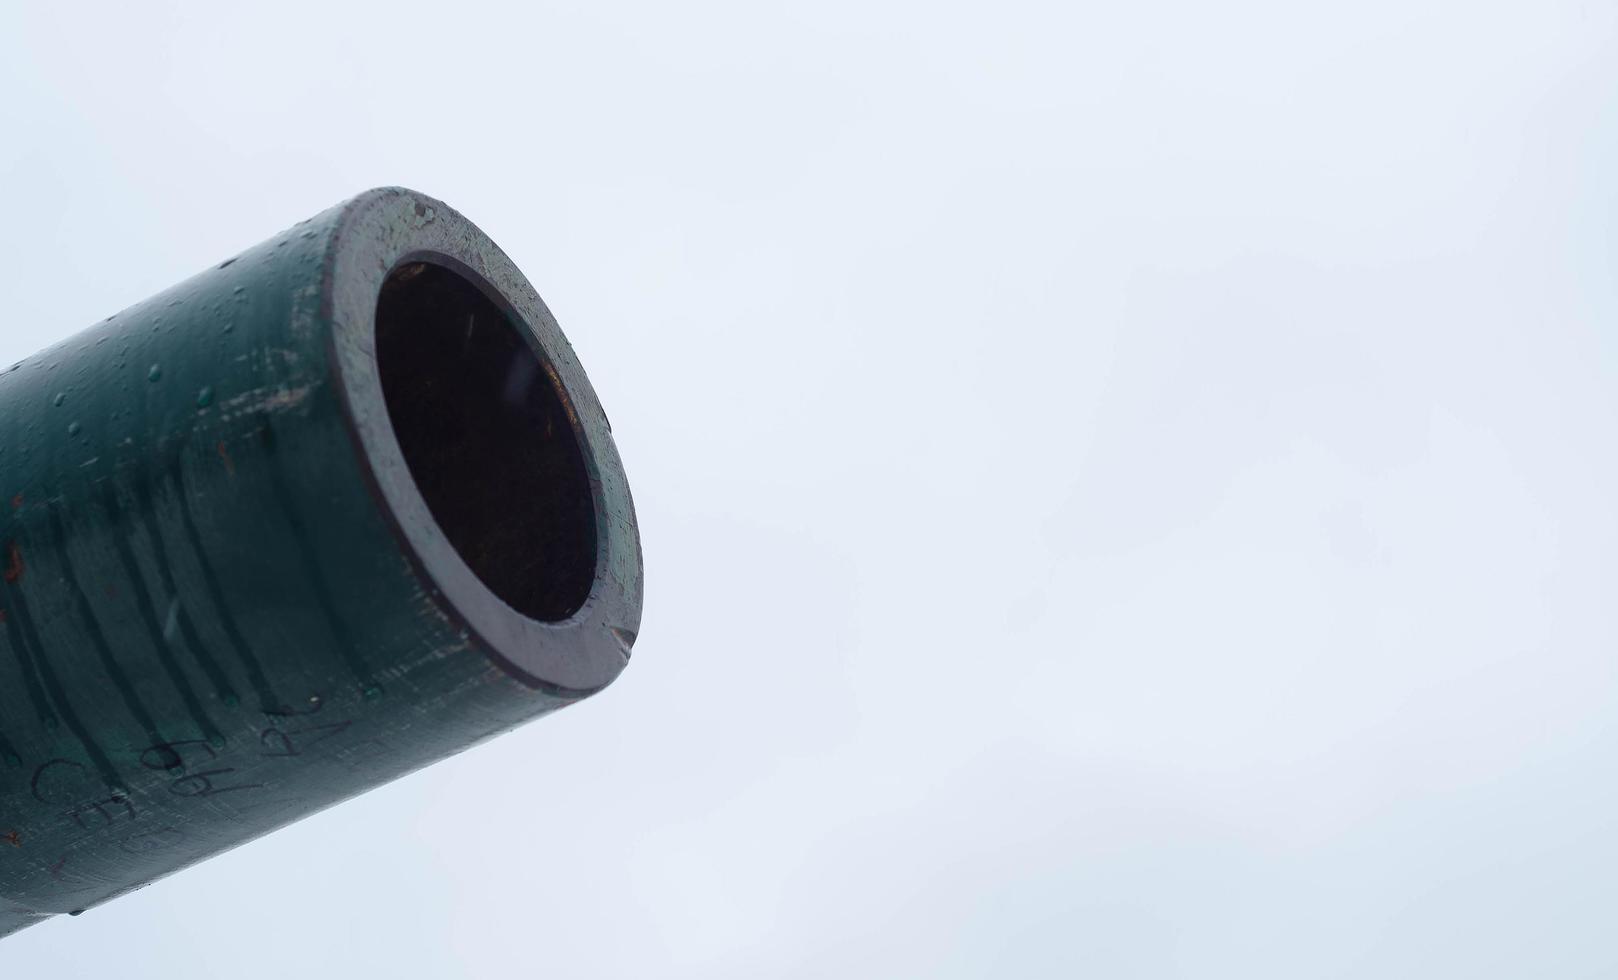 Edge of tank muzzle in cloudy day, close up. photo